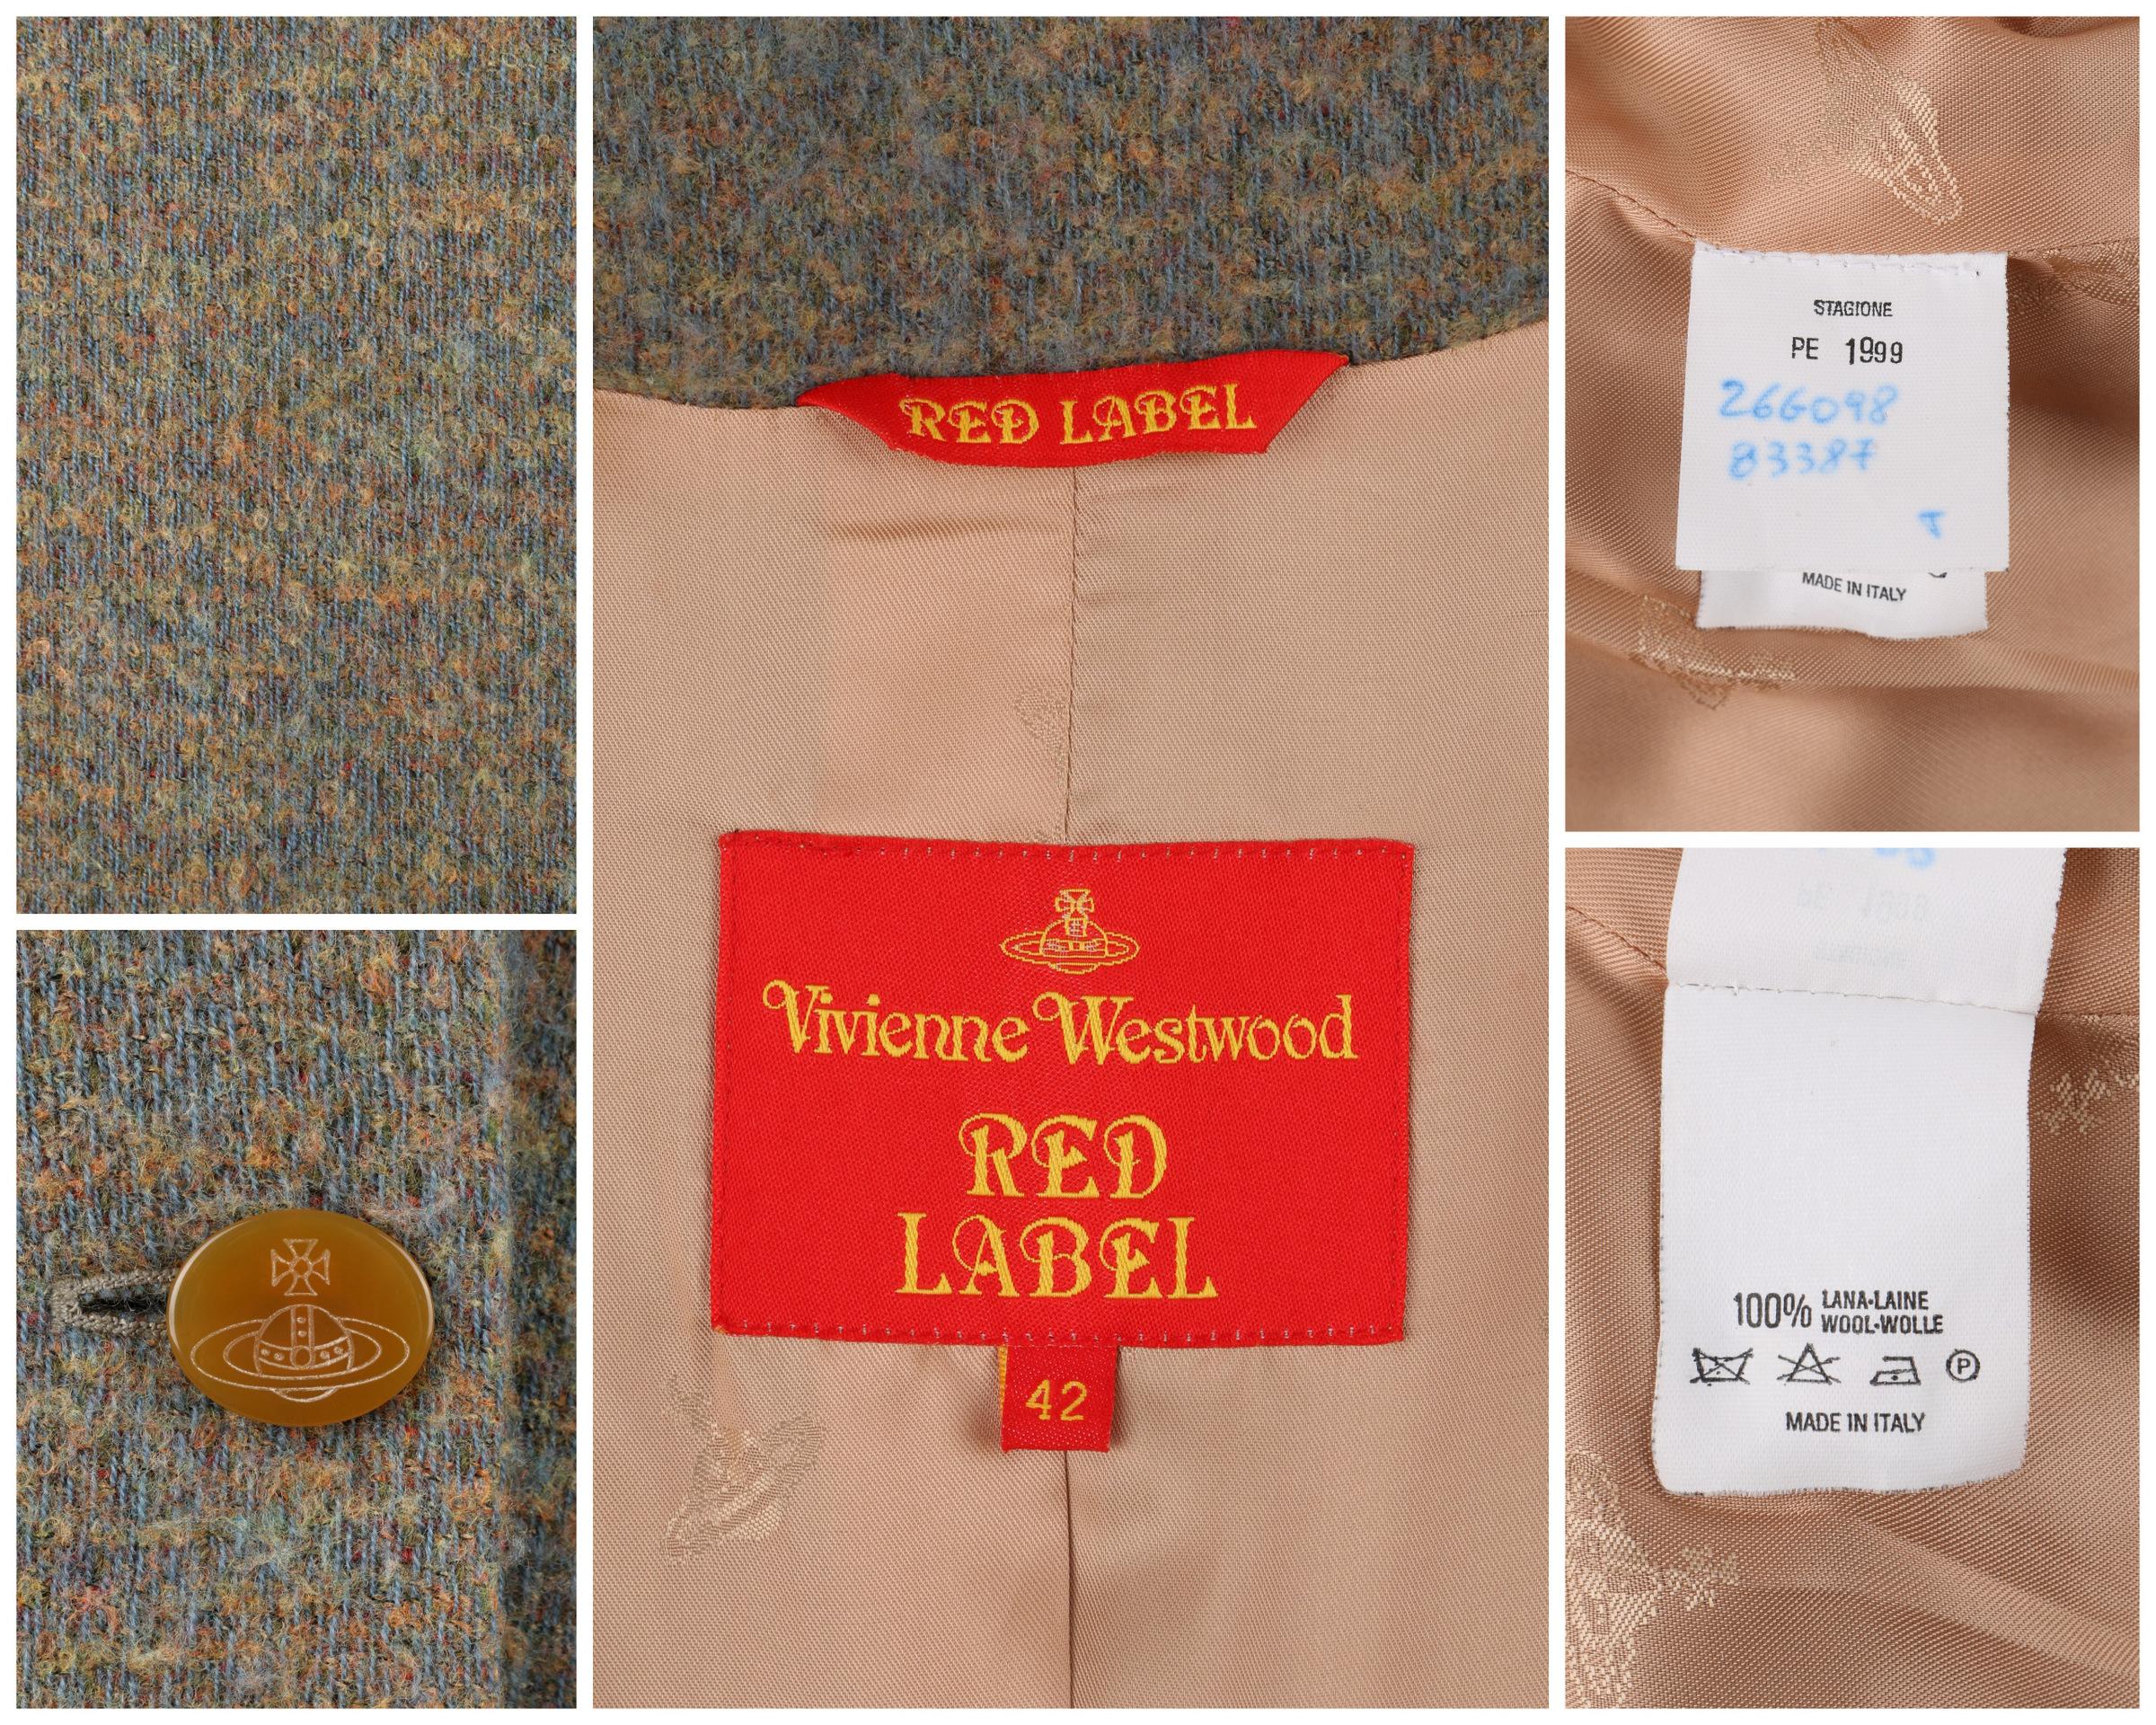 VIVIENNE WESTWOOD Red Label S/S 1999 Tweed Wool Tailored Princess Coat Jacket In Good Condition For Sale In Thiensville, WI